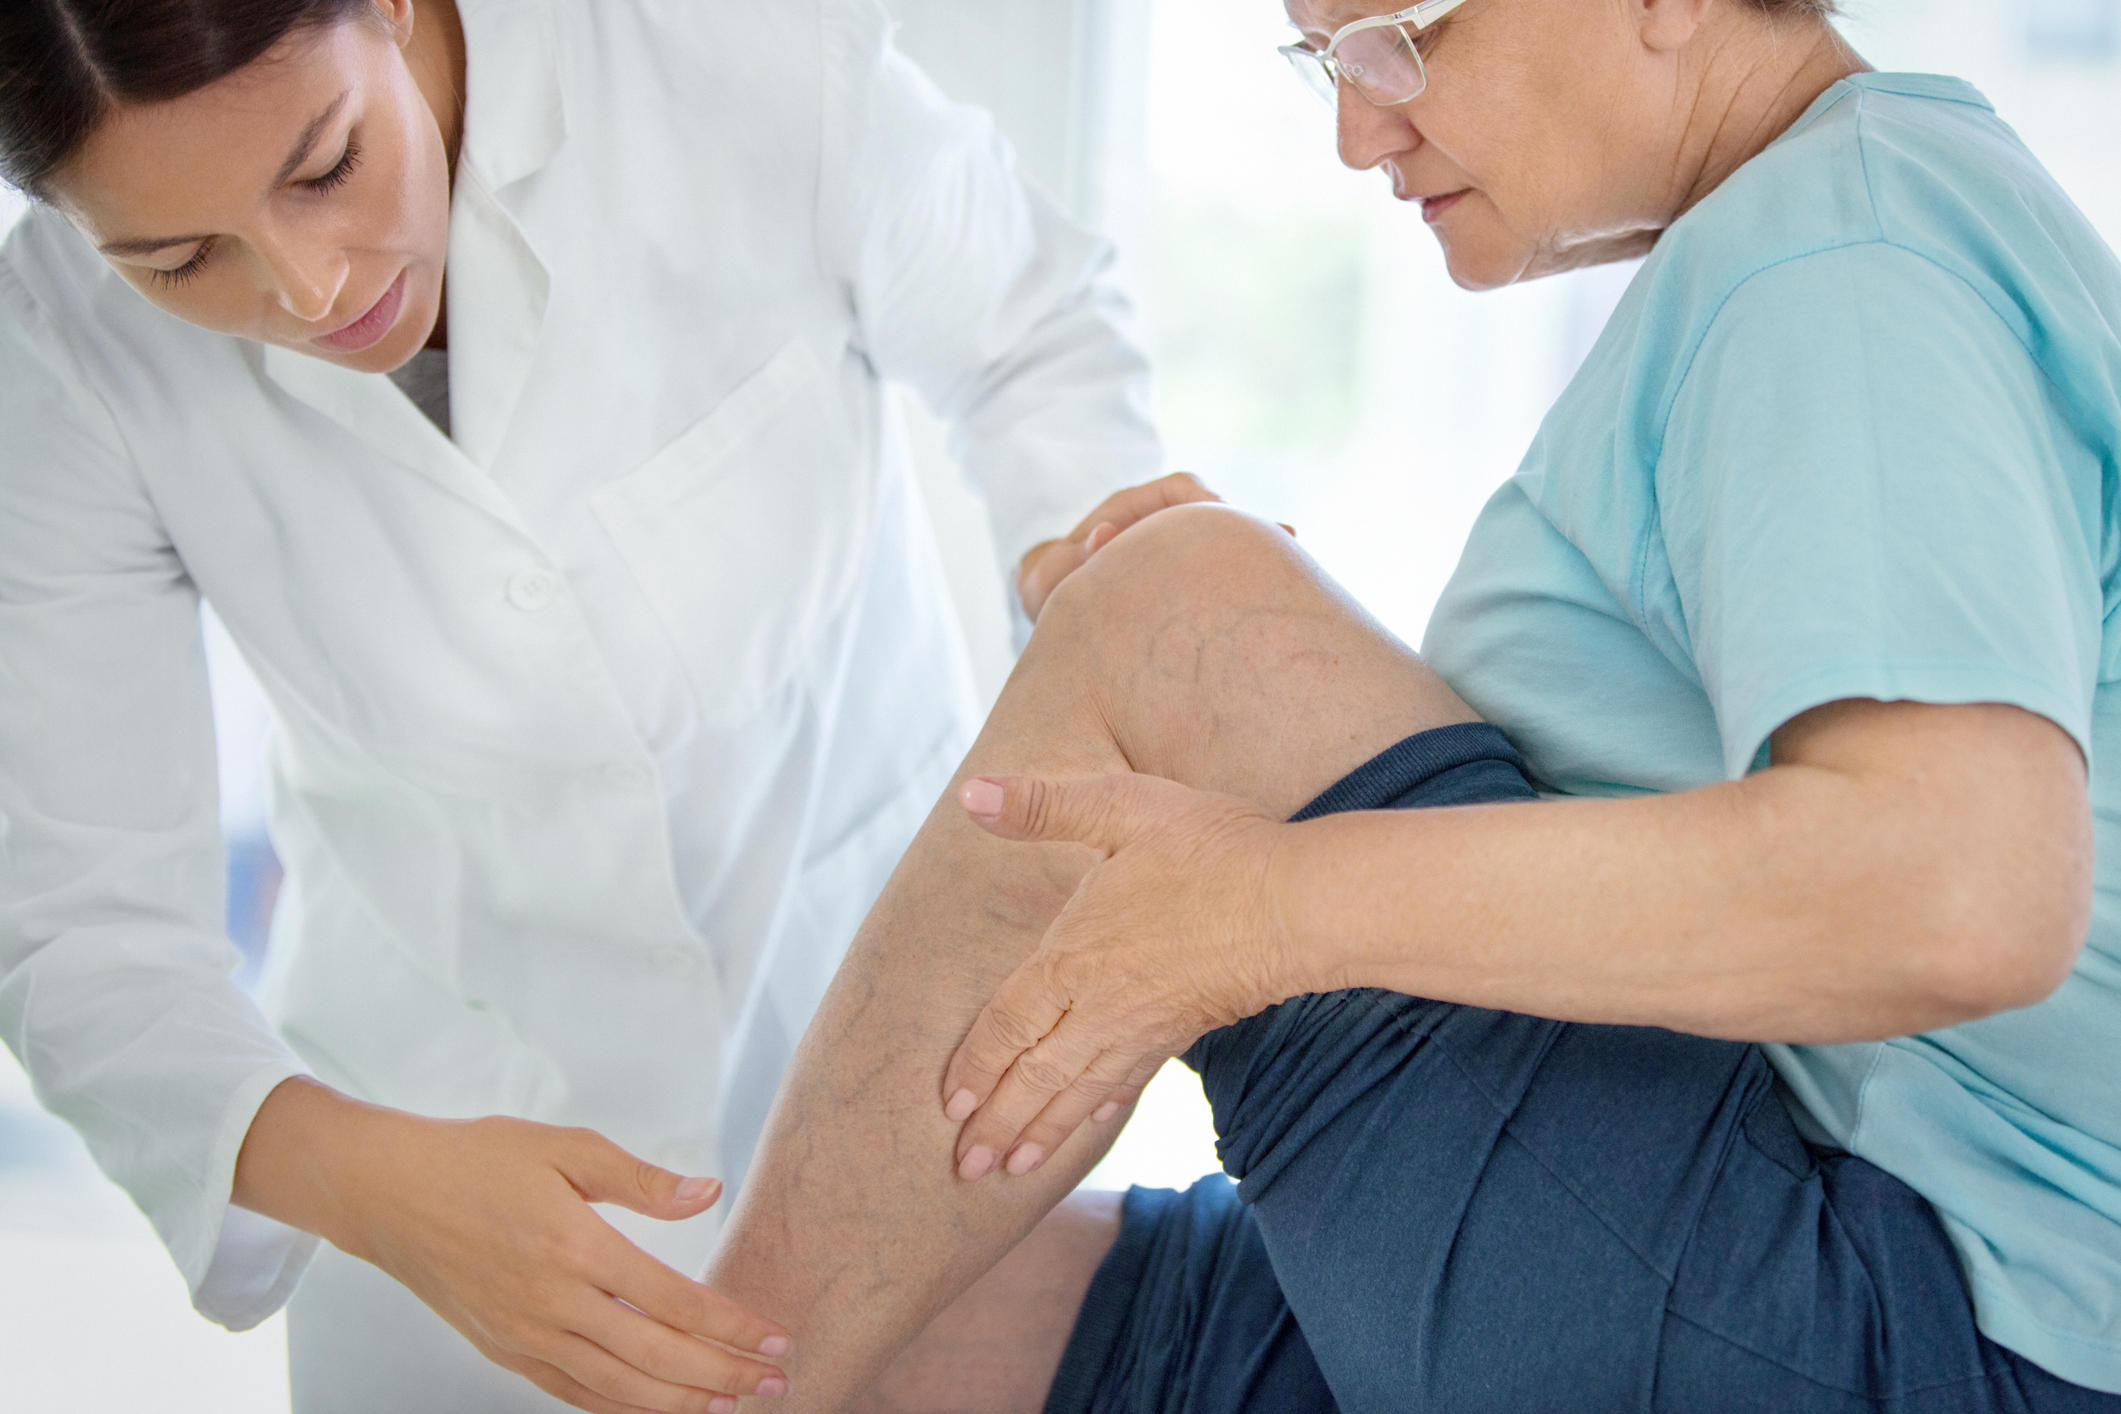 what kind of doctor treats varicose veins